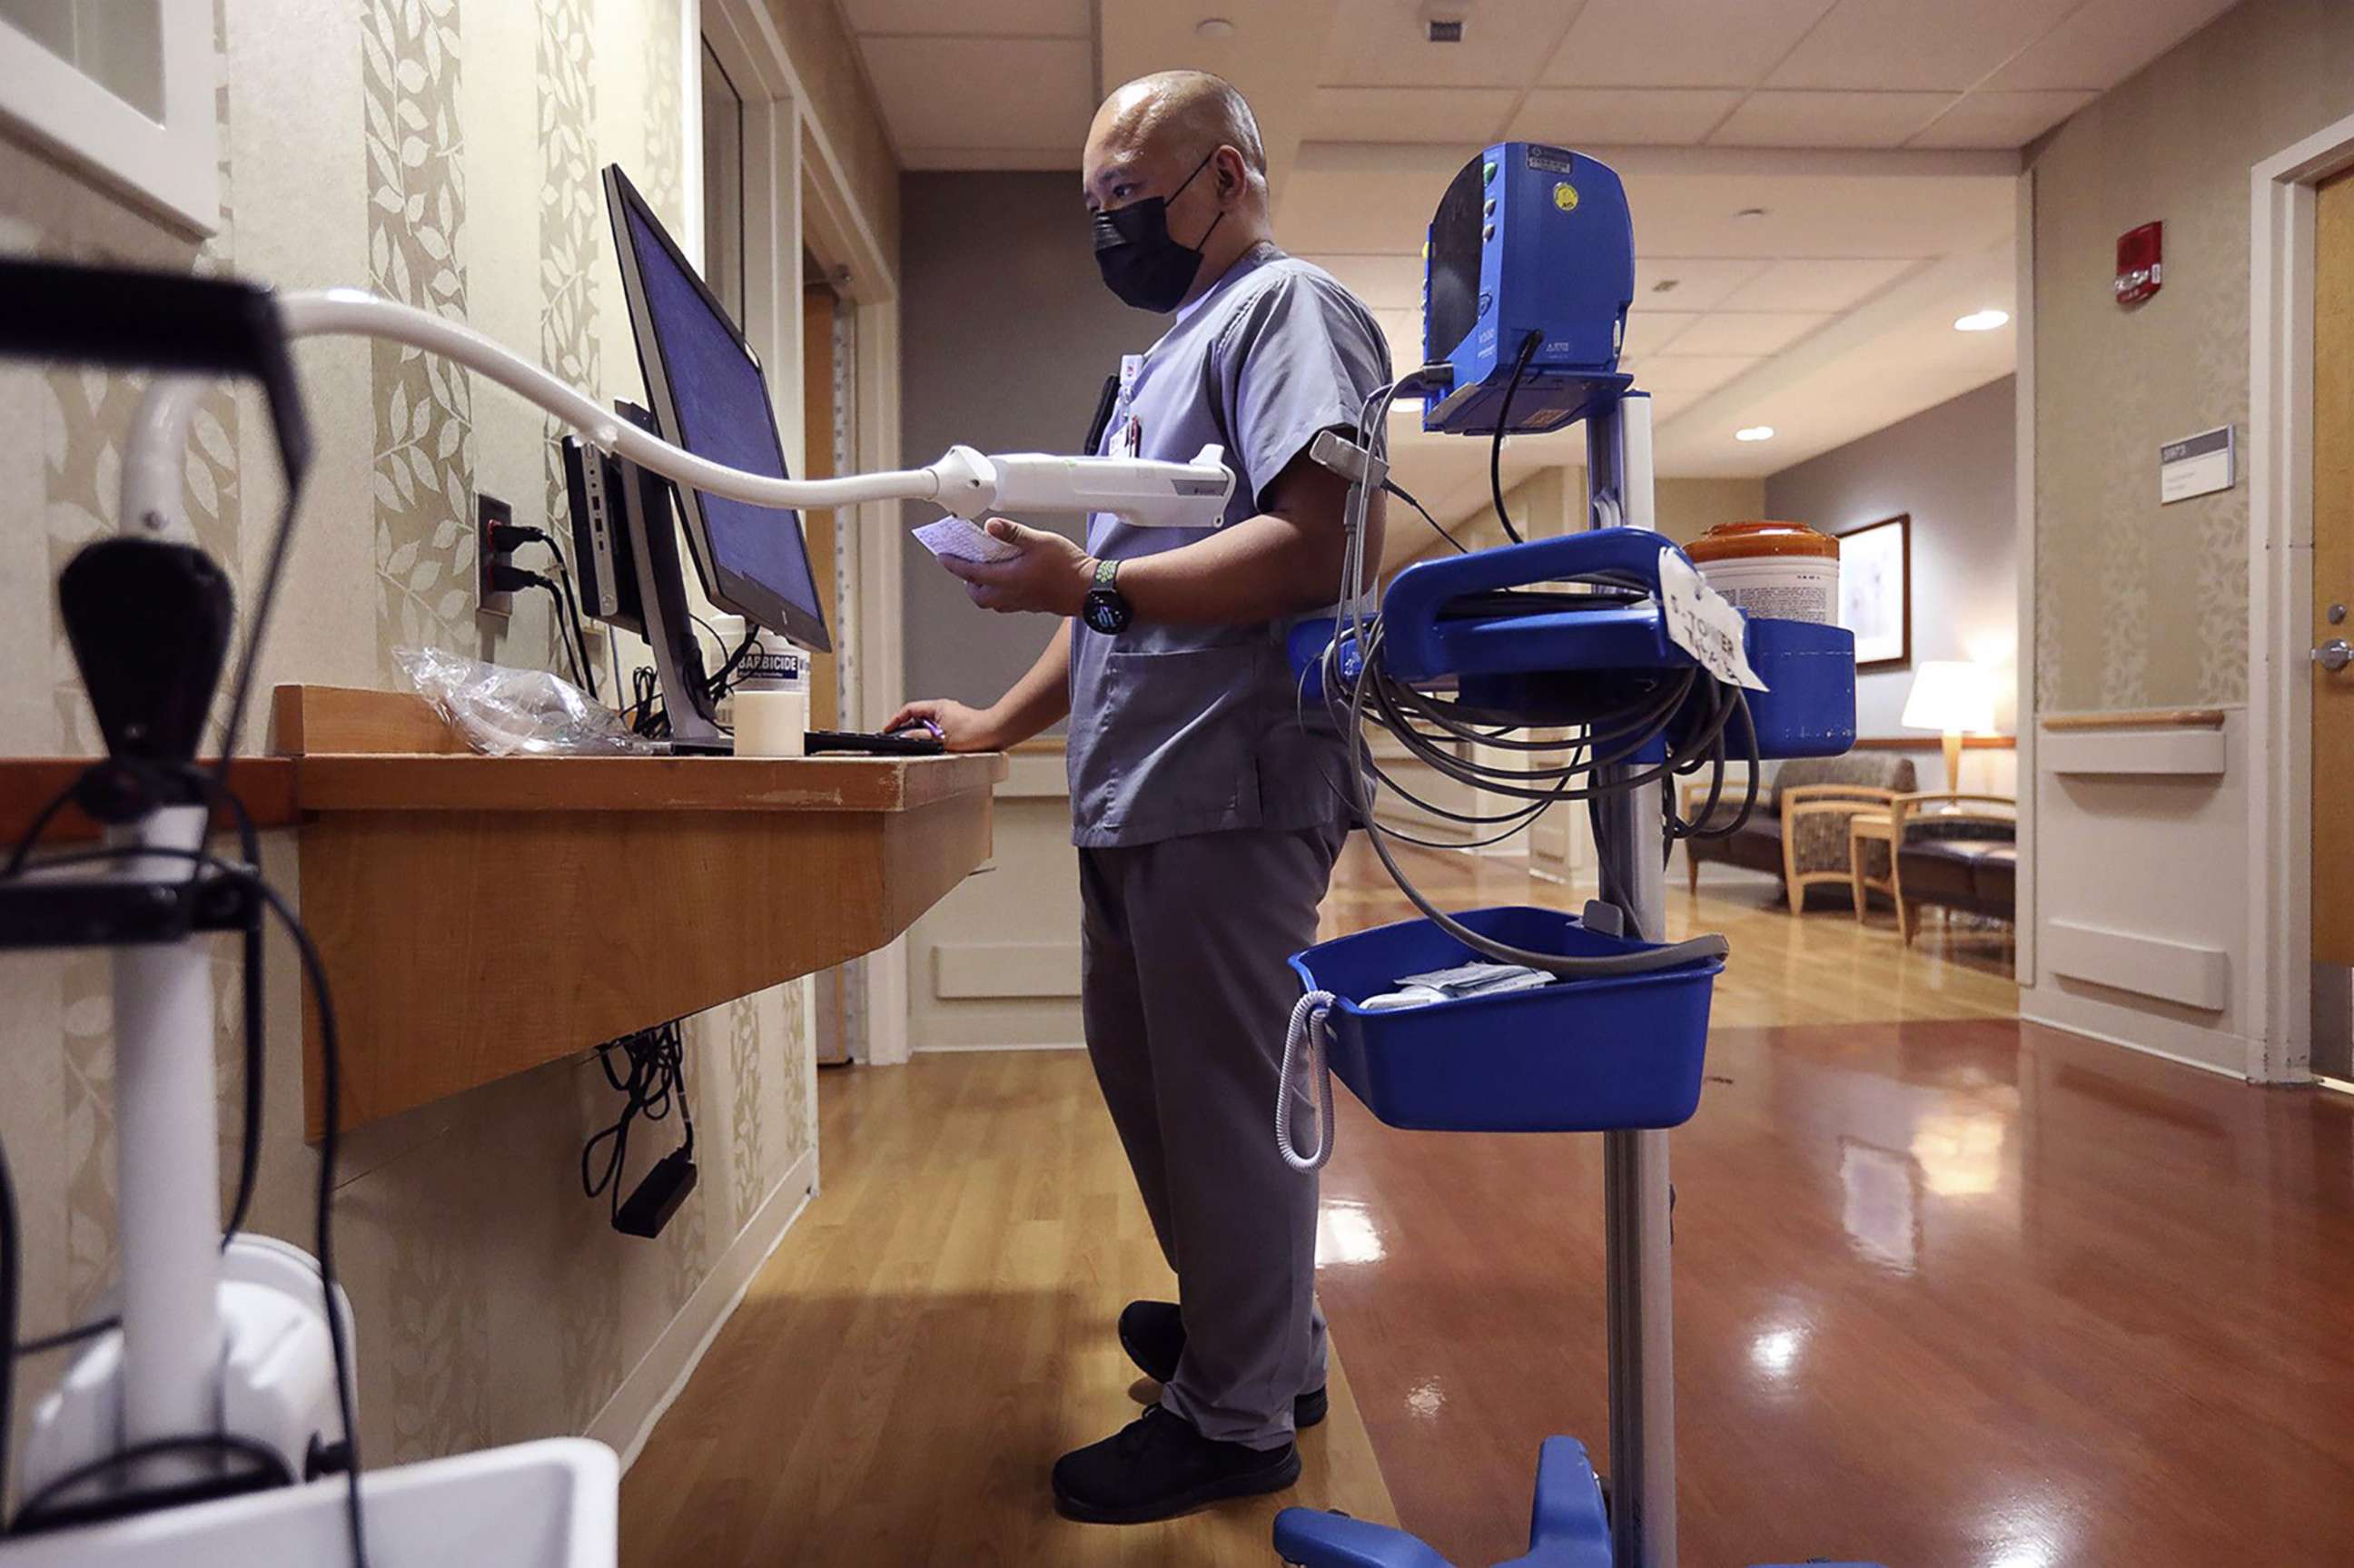 PHOTO: Patient care technician Eimann Joseph Mago checks vitals and orders on a computer at Loyola University Medical Center in Maywood, Ill., April 22, 2022.